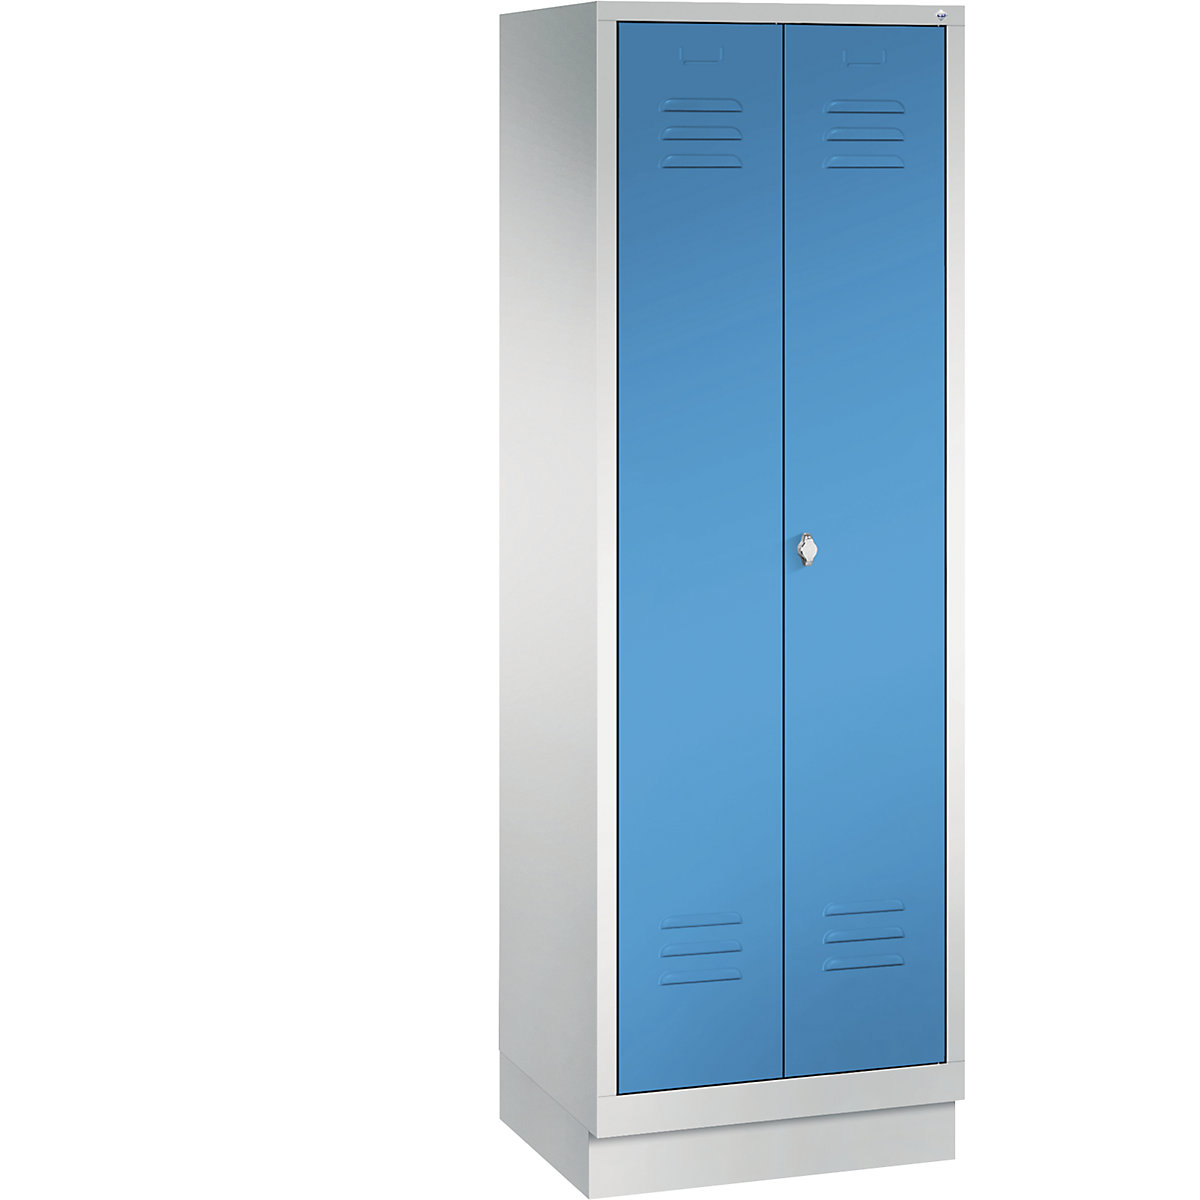 CLASSIC cloakroom locker with plinth, doors close in the middle – C+P, 2 compartments, compartment width 300 mm, light grey / light blue-10